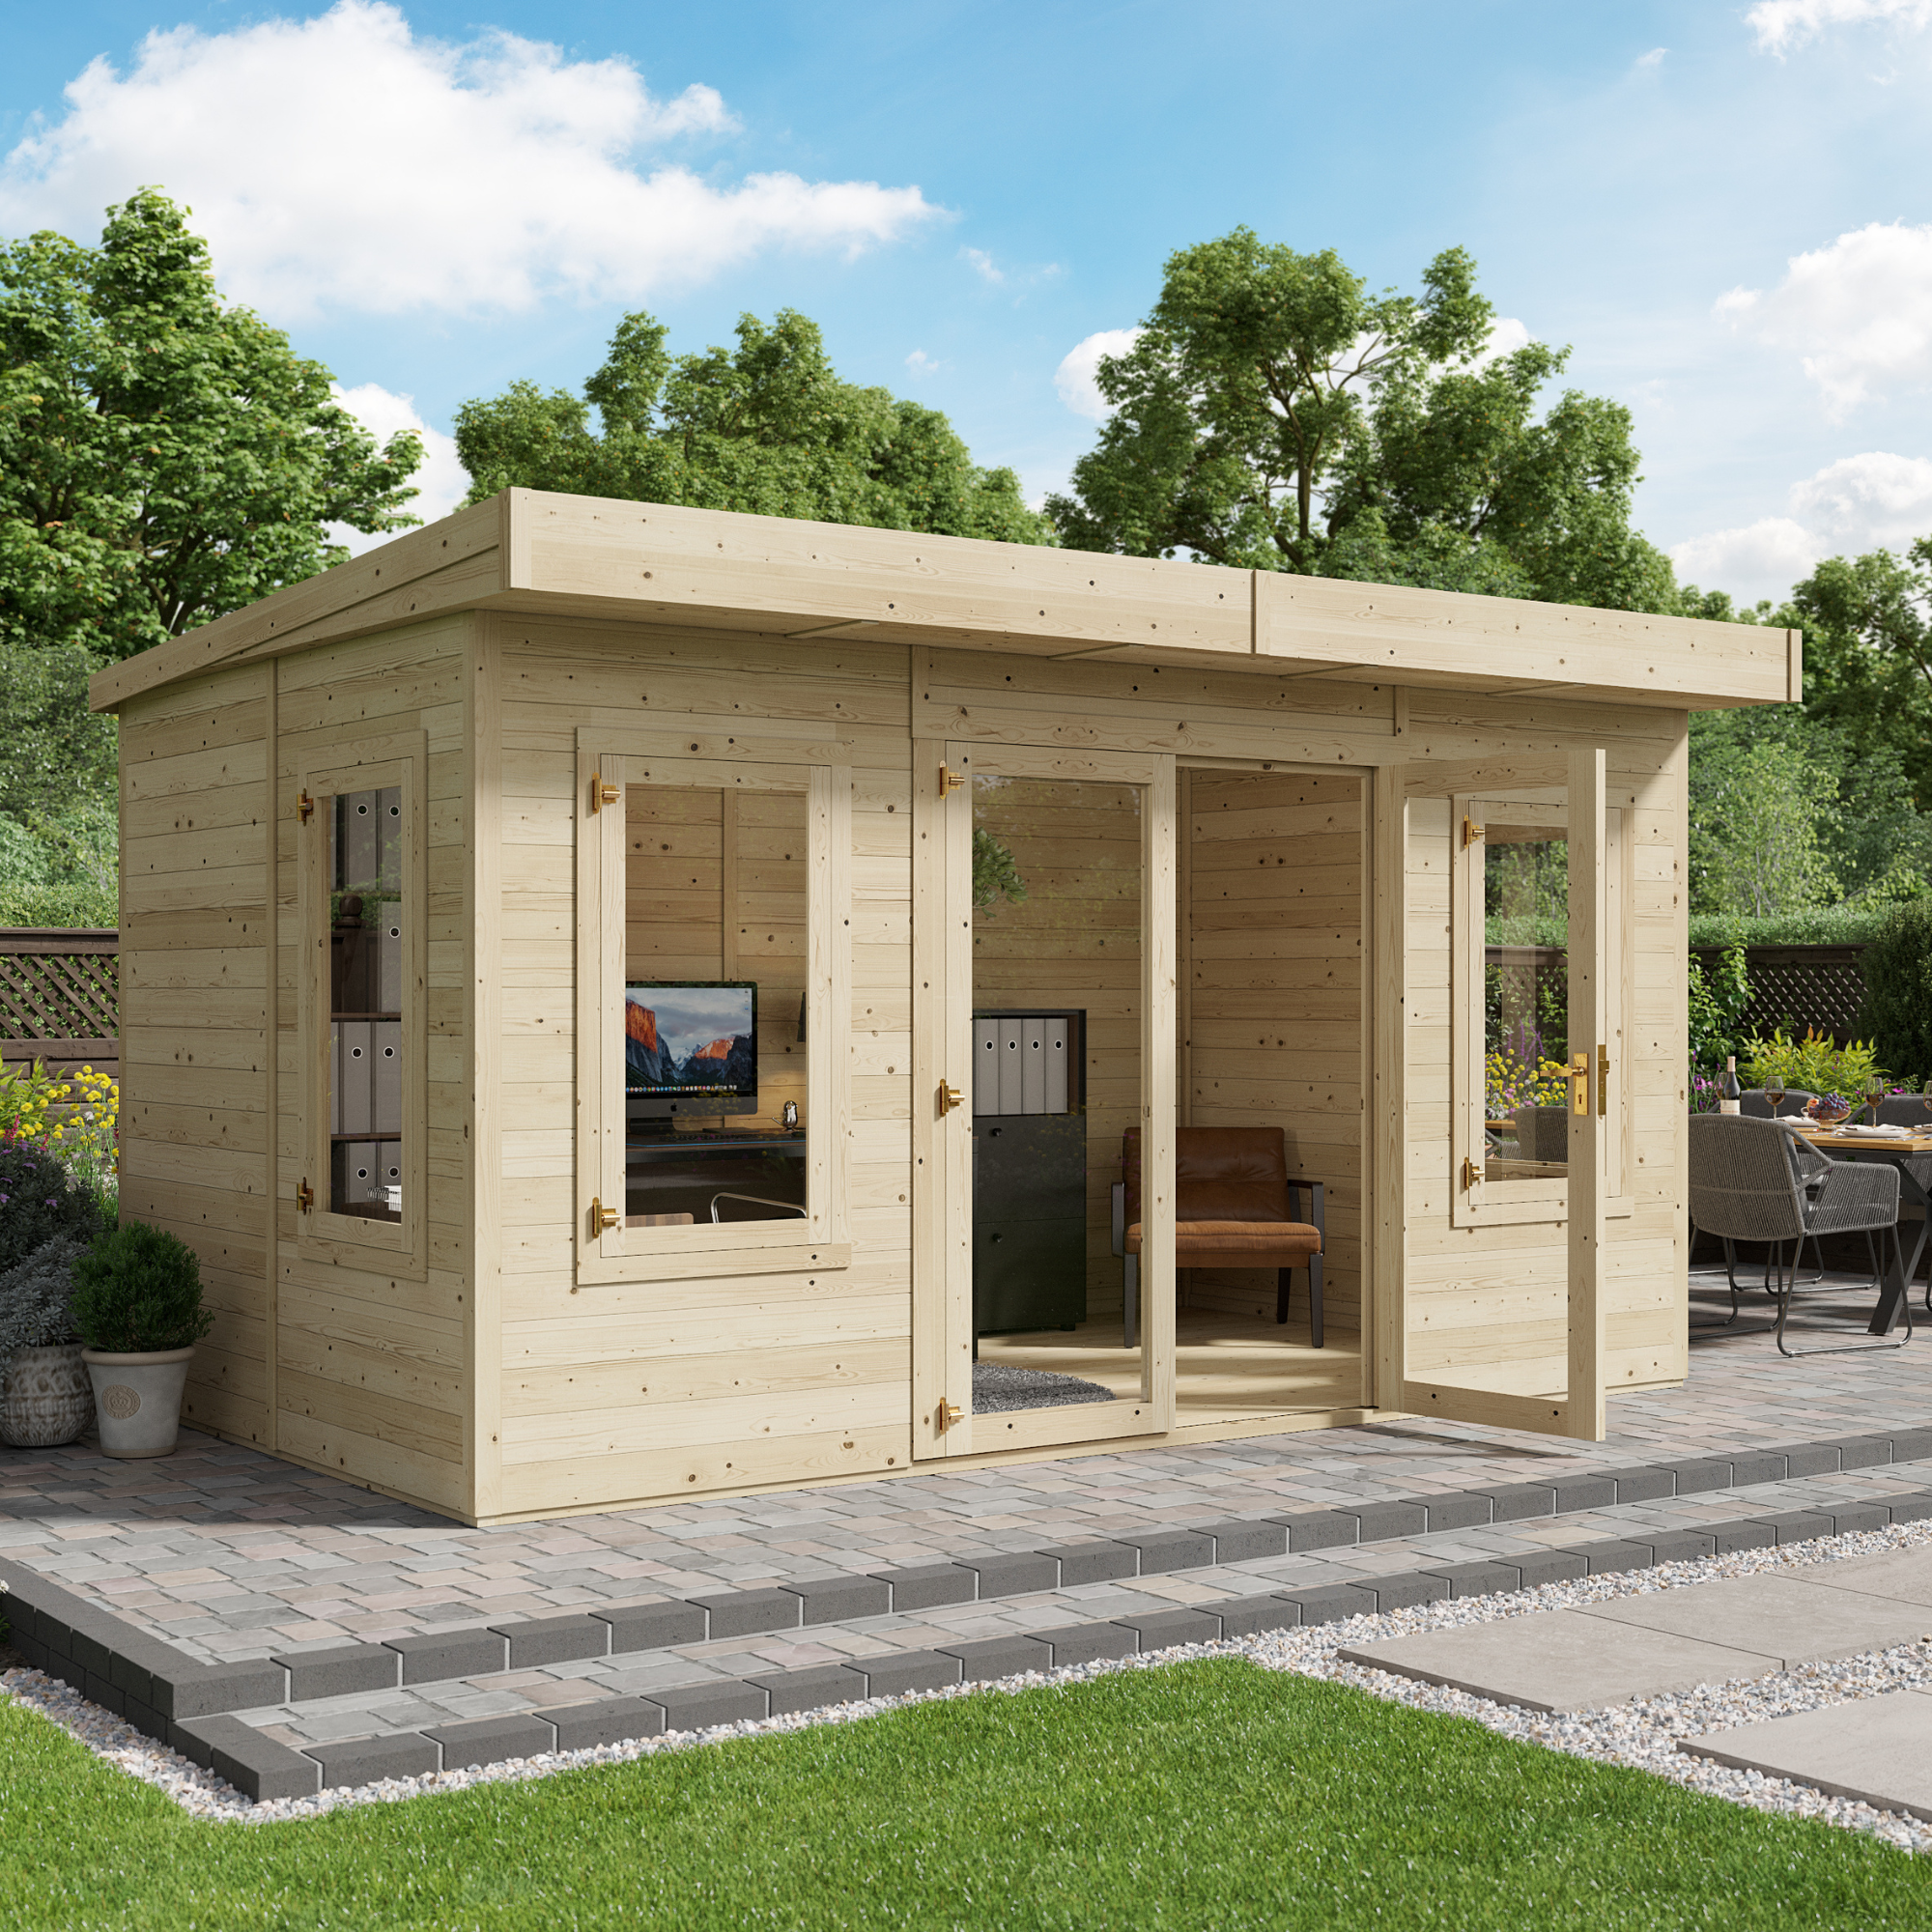 BillyOh Outpost Insulated Building - PT - 8ft x 8ft - 2.5x2.5m